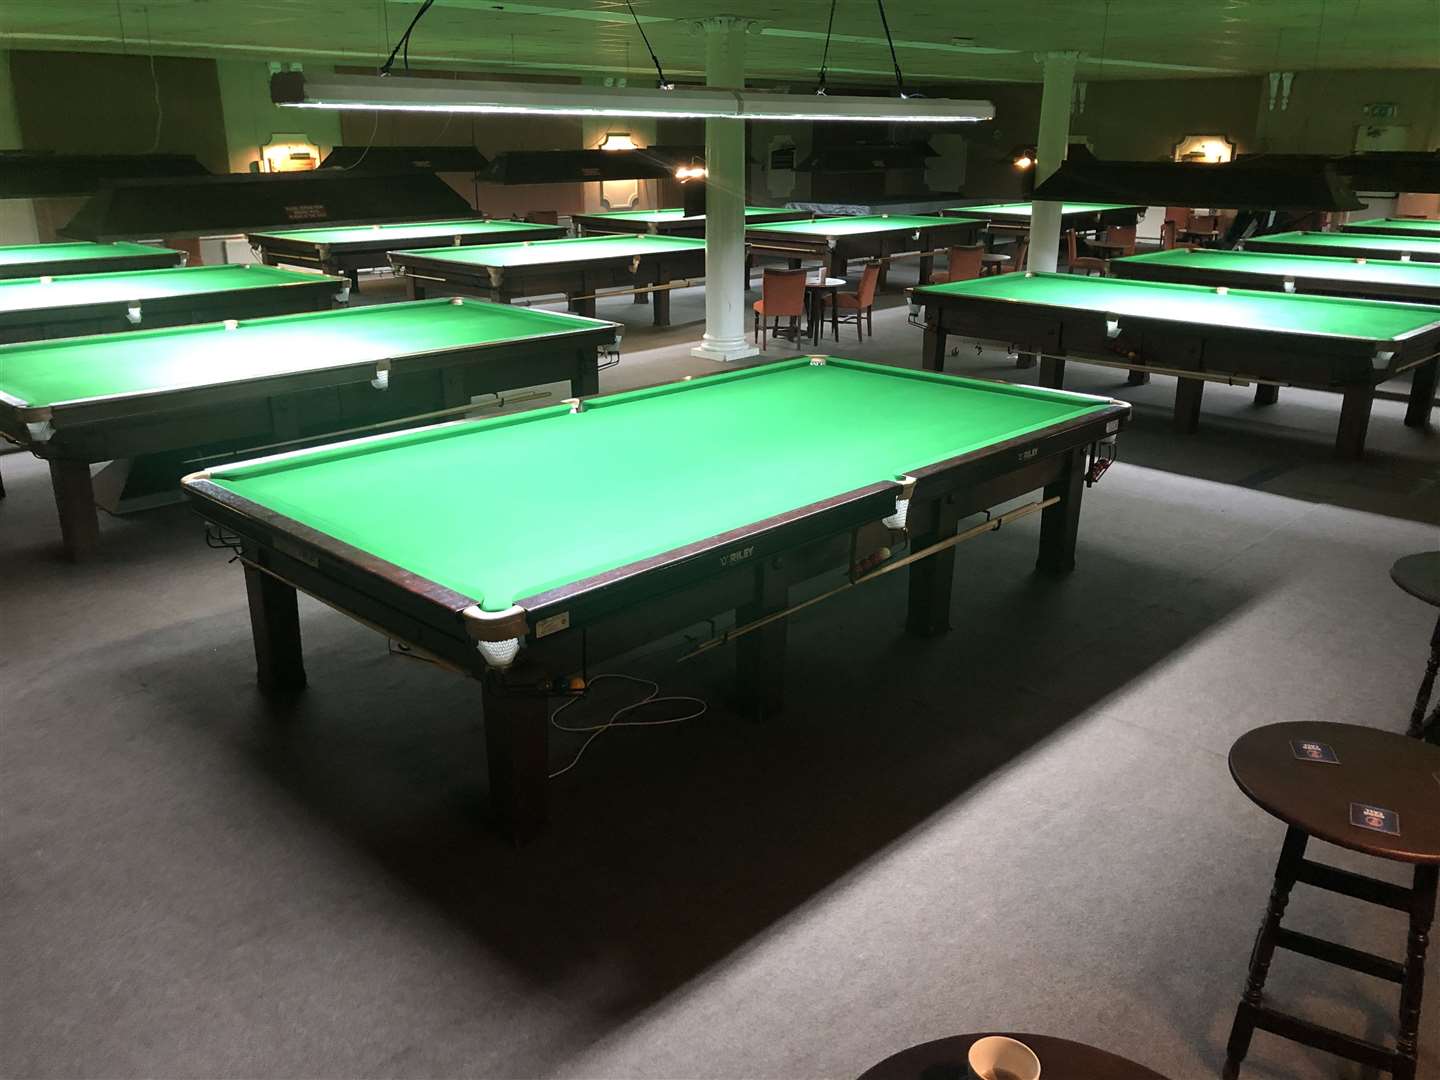 The new club in Cliftonville has 14 snooker tables